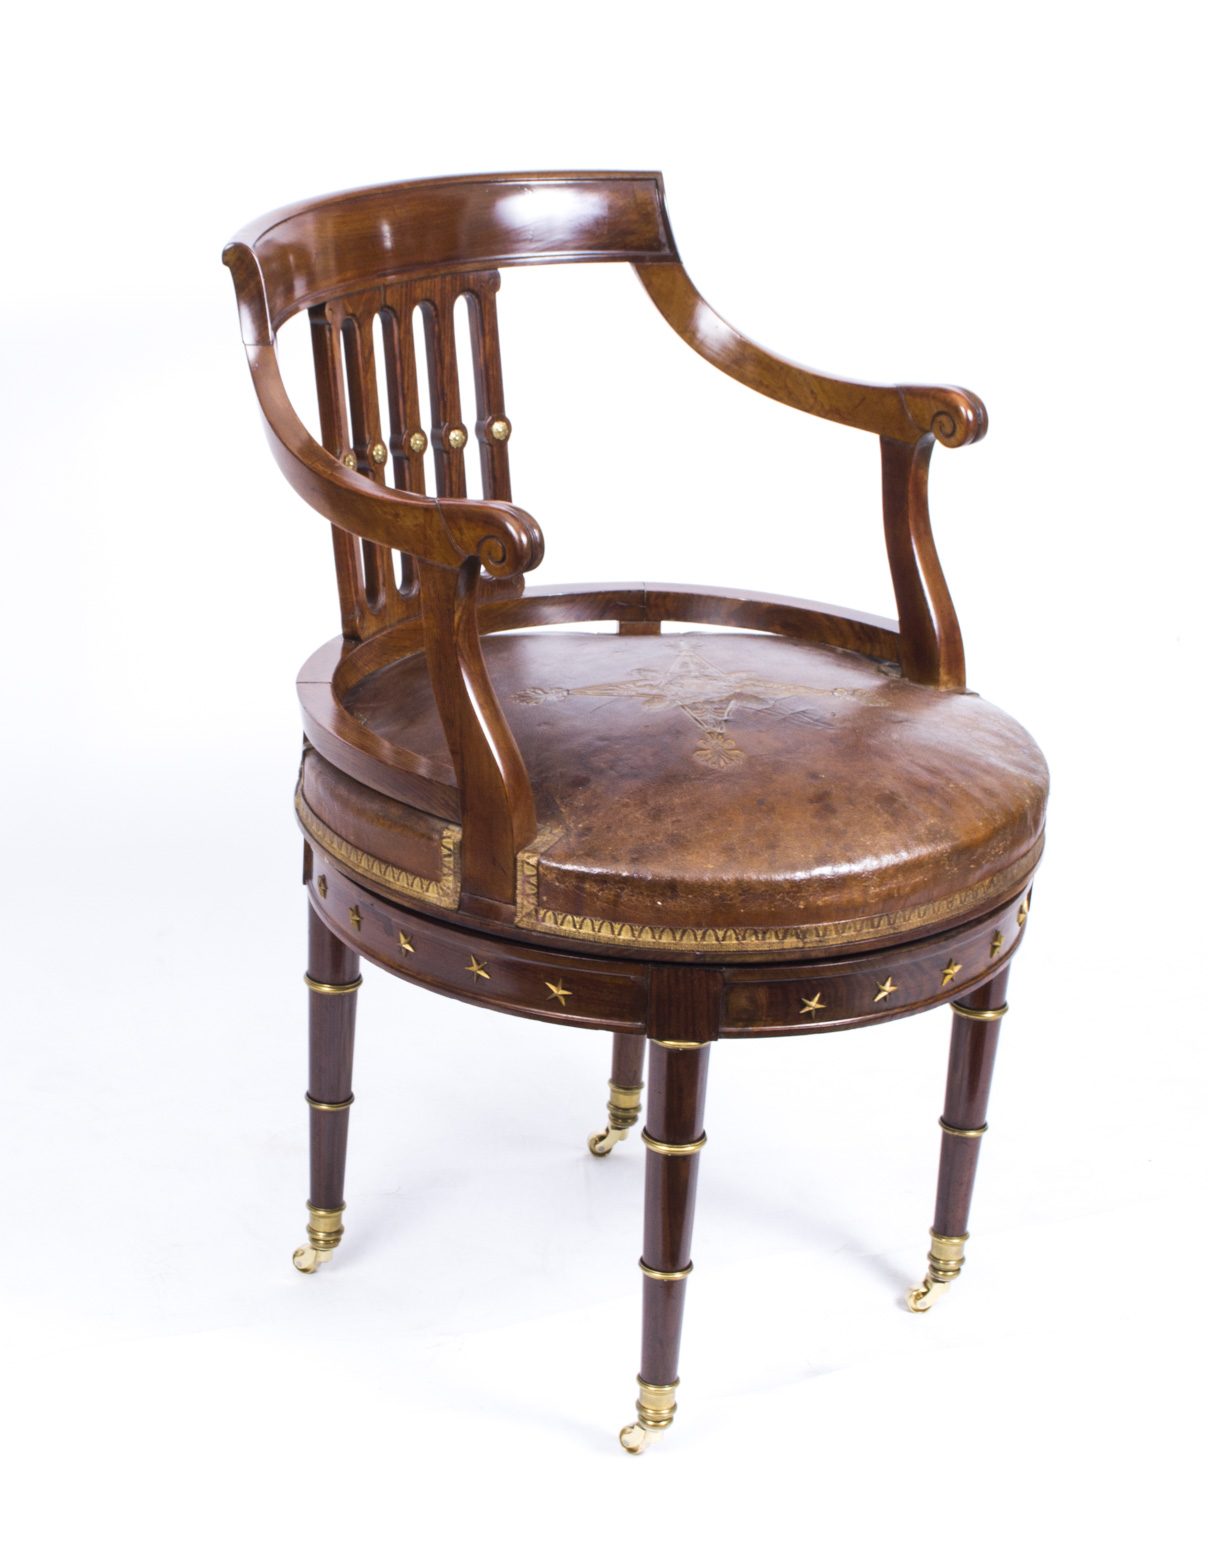 Antique French Louis XVI Style Mahogany Revolving Desk Chair in